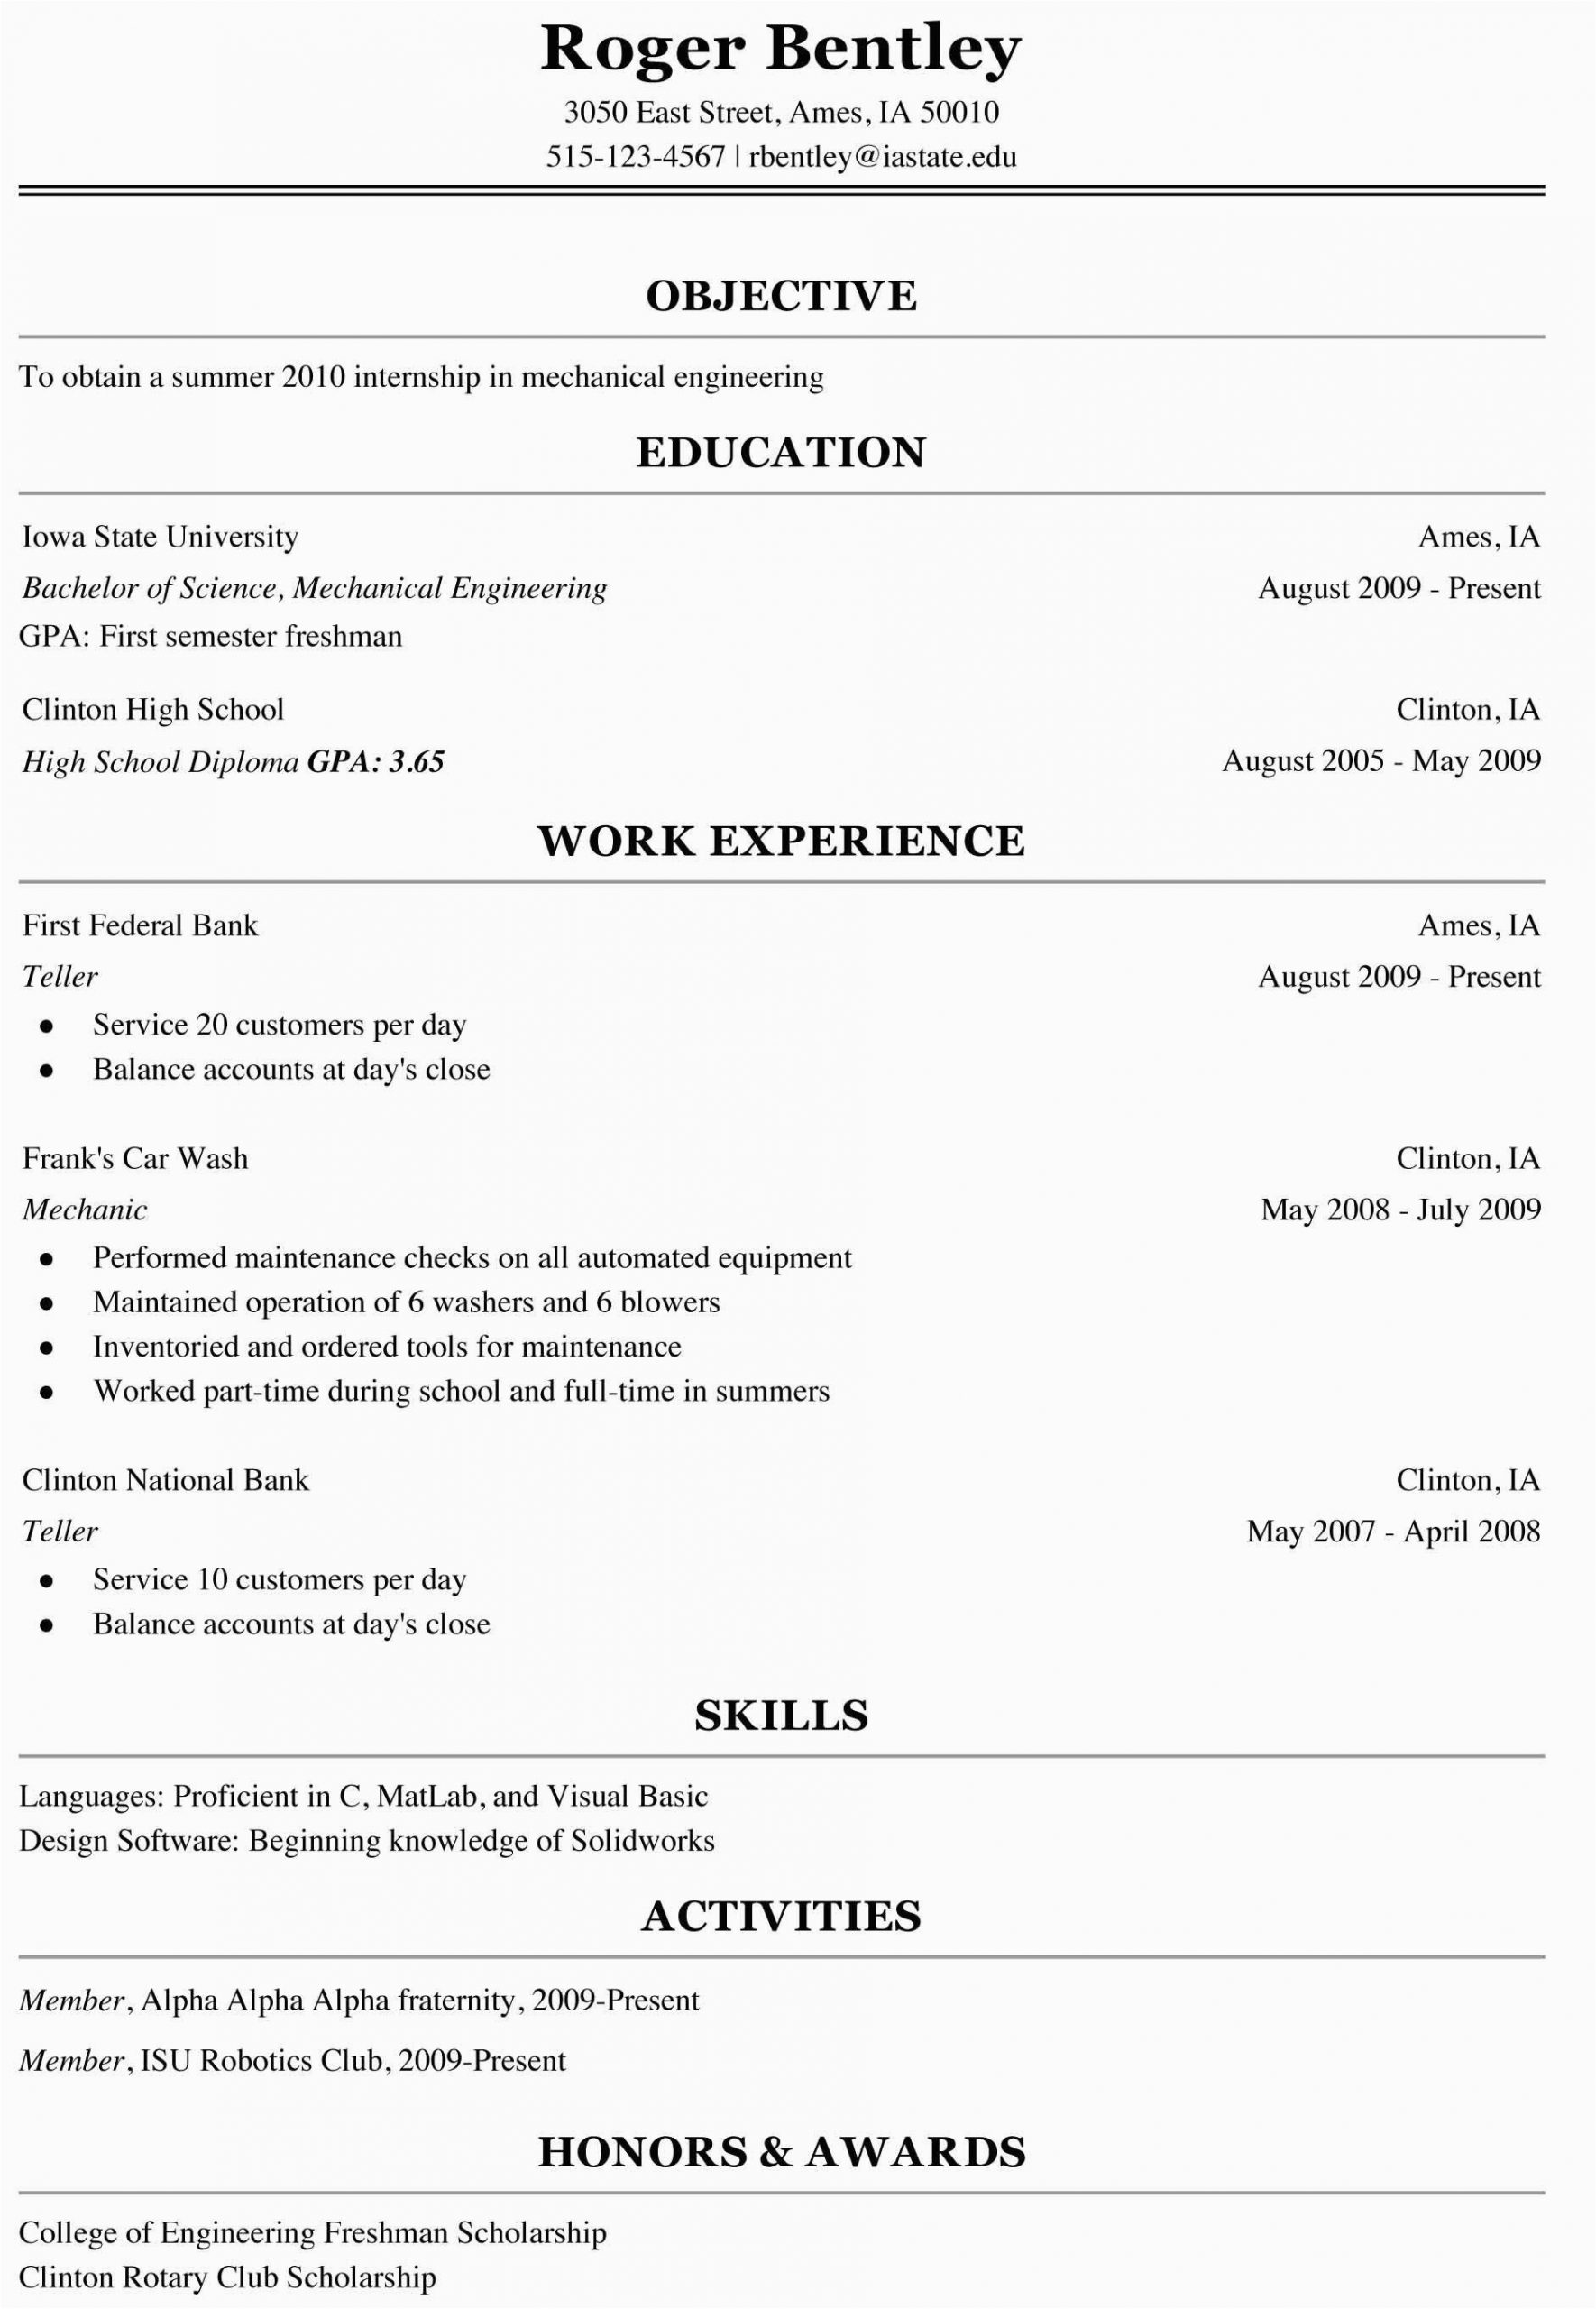 Resume Template for College Student with Little Work Experience Resume with No Work Experience College Student Pdf